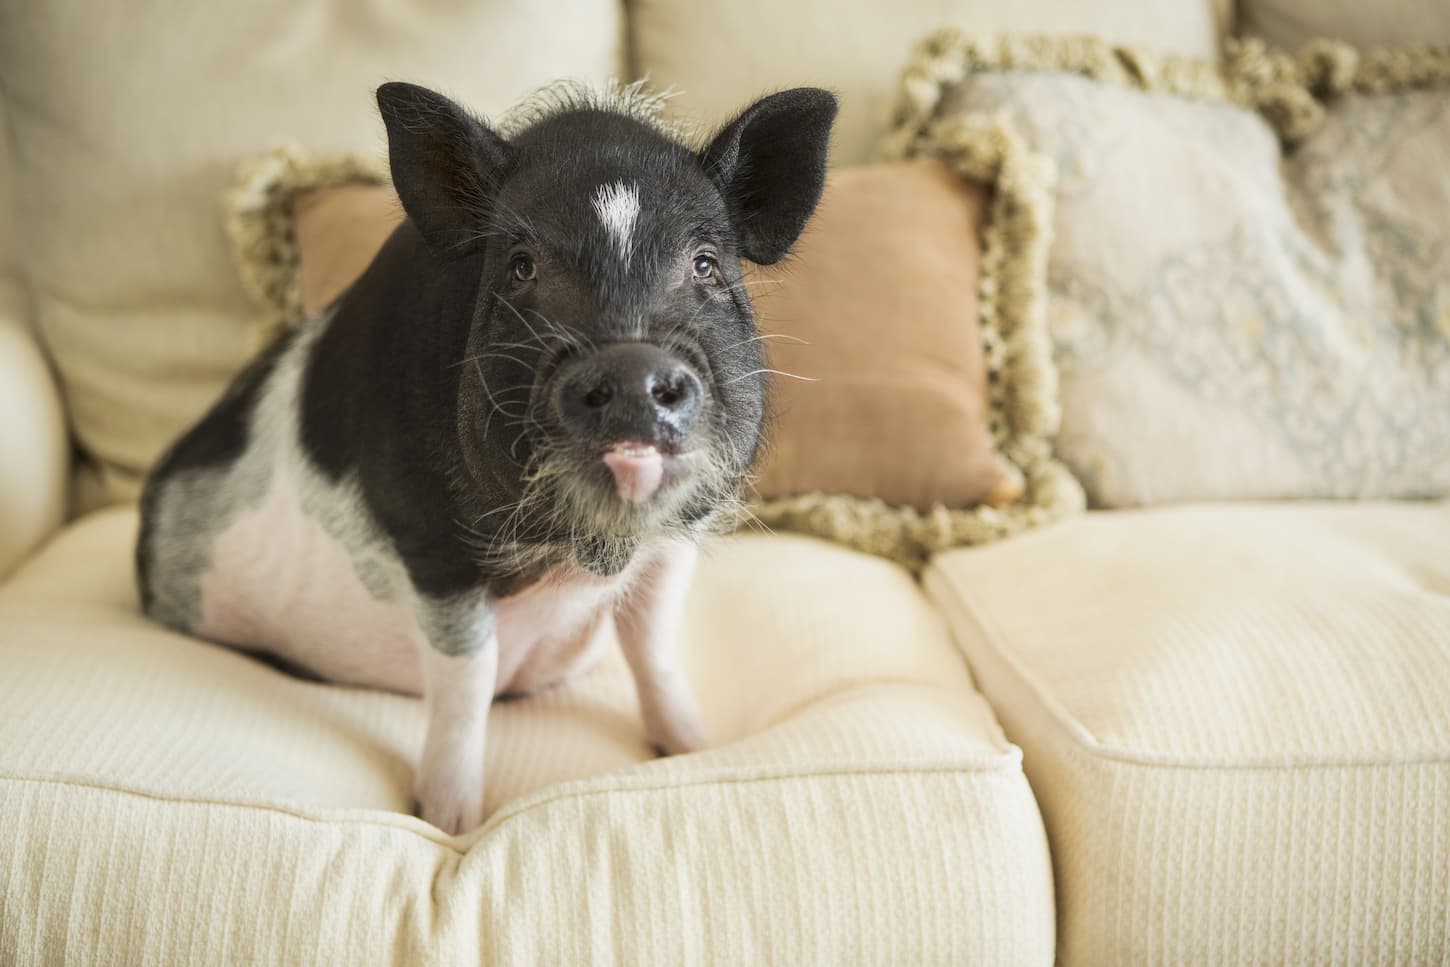 An image of a pot bellied pig sitting on the cushions of a sofa in an elegant mansion.